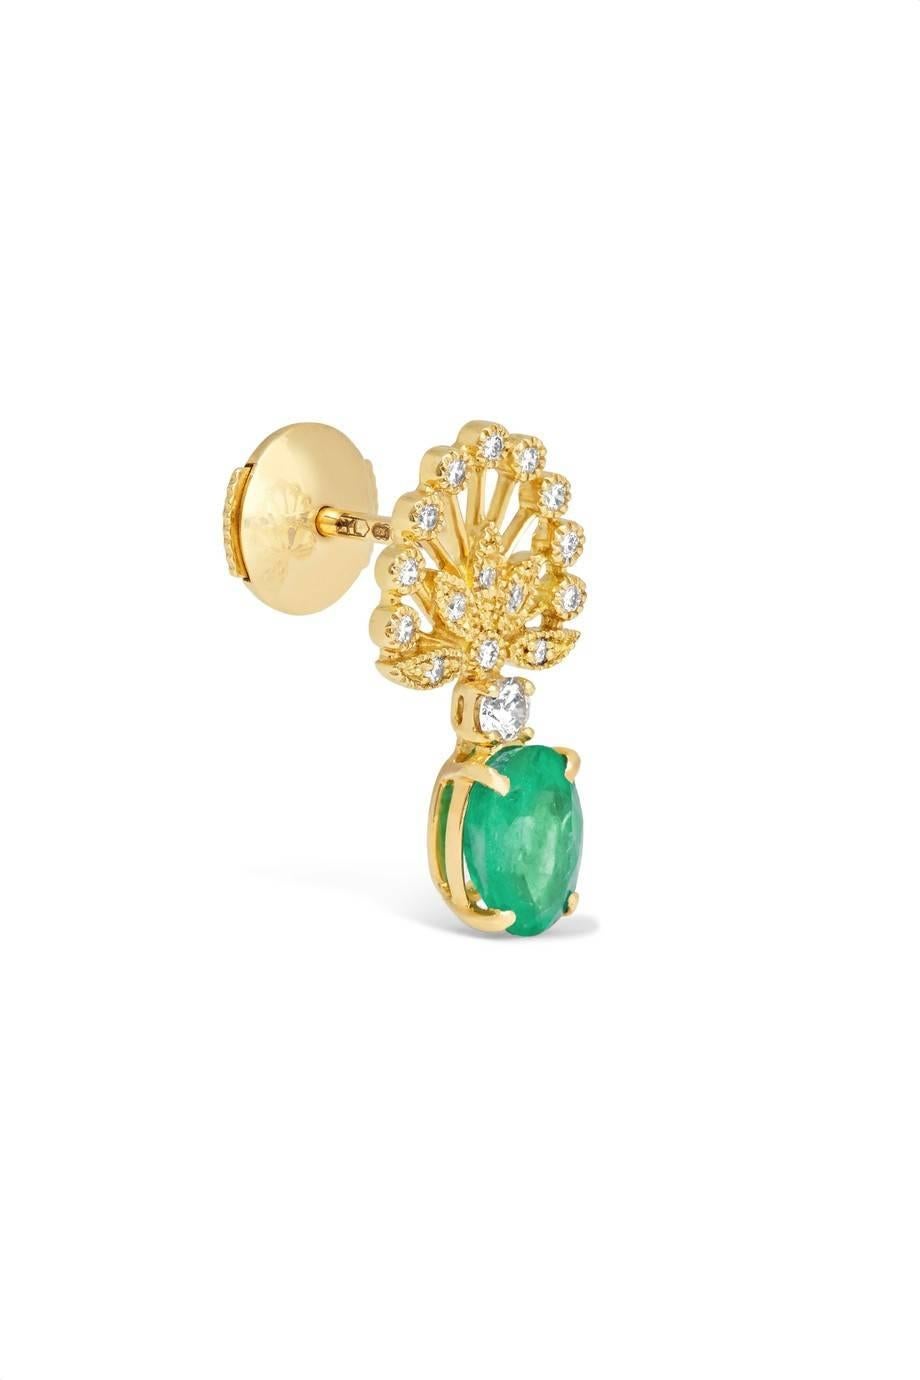 Earrings in Yellow Gold 18 carats 4,5gr Approx.
Diamonds 0,30 Carats Approx.
Emeralds 1,40 Carats Approx.
Alpa System
Sold as a pair 
